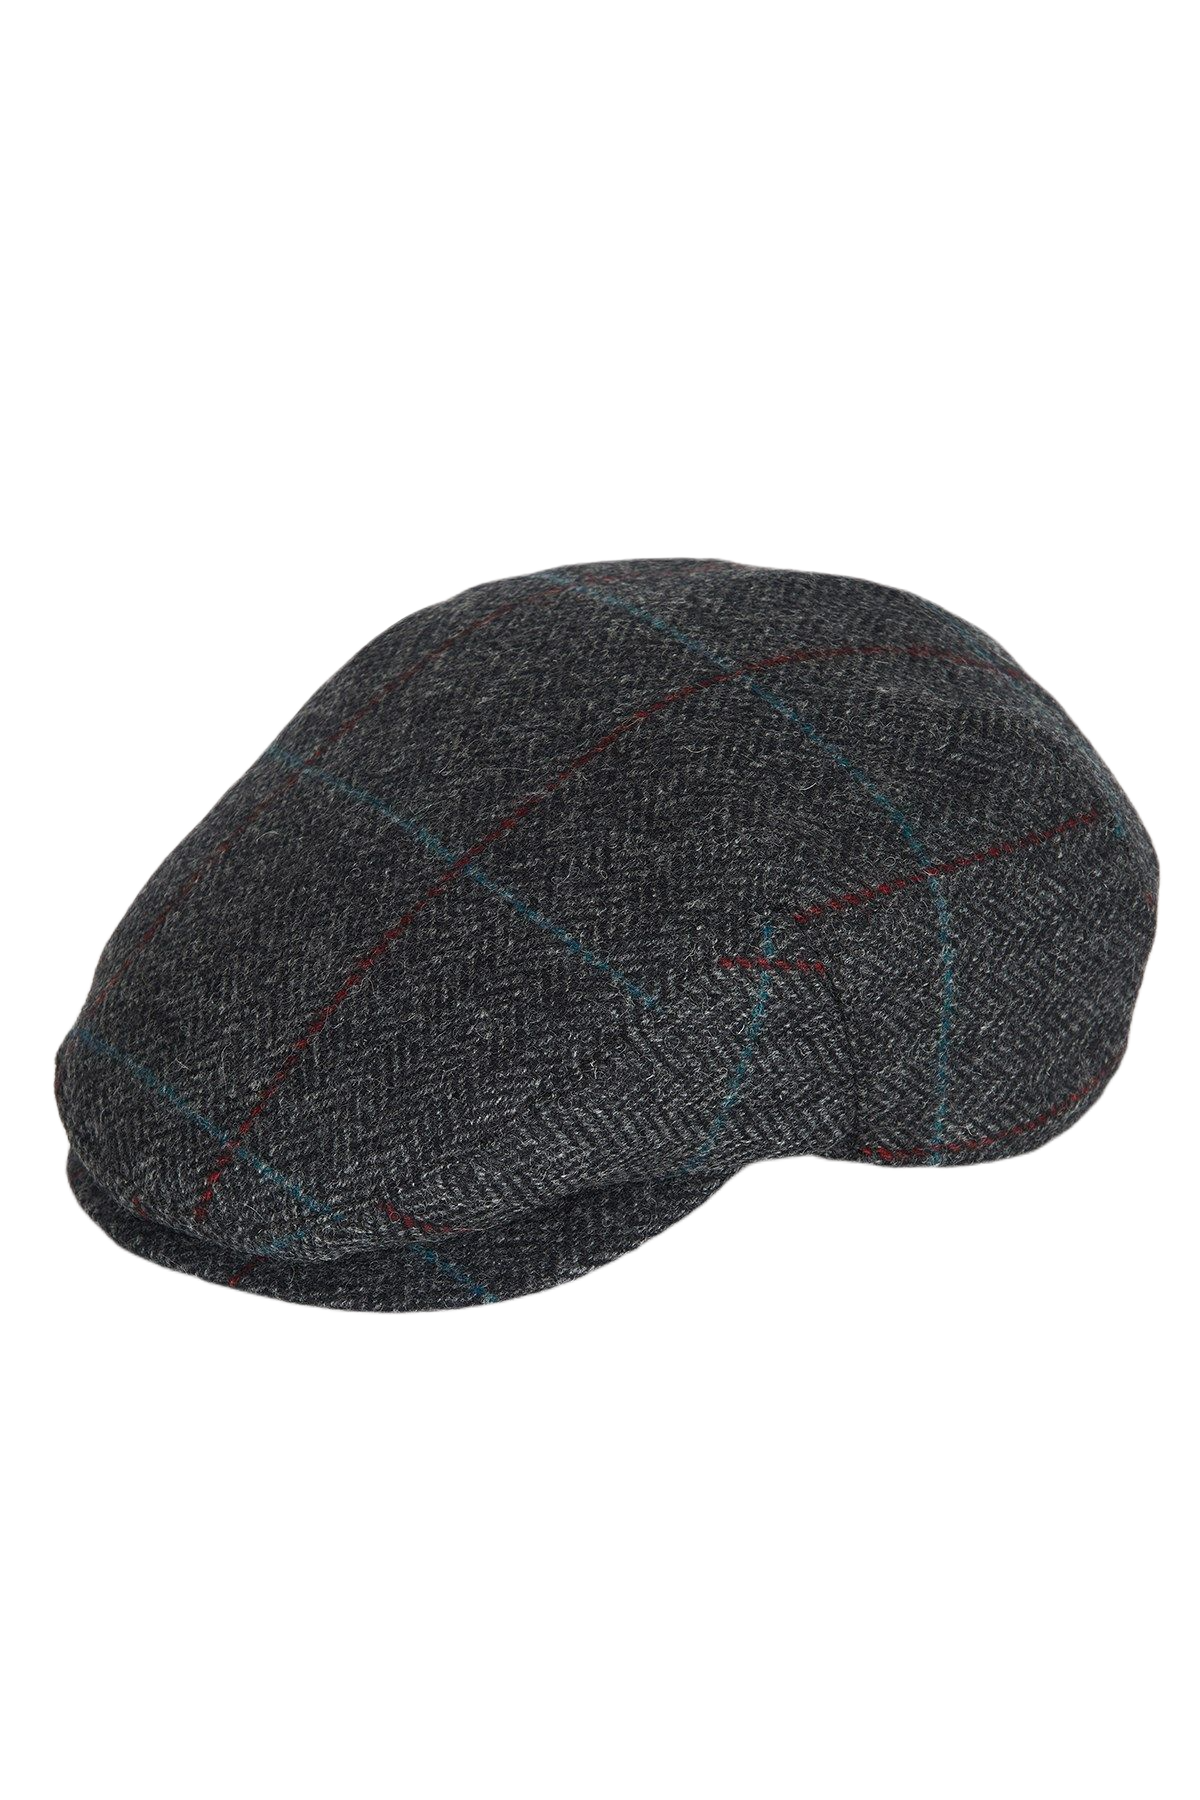 BARBOUR MHA706-CH31 Cairm Flat Cap Charcoal-Red-Blue